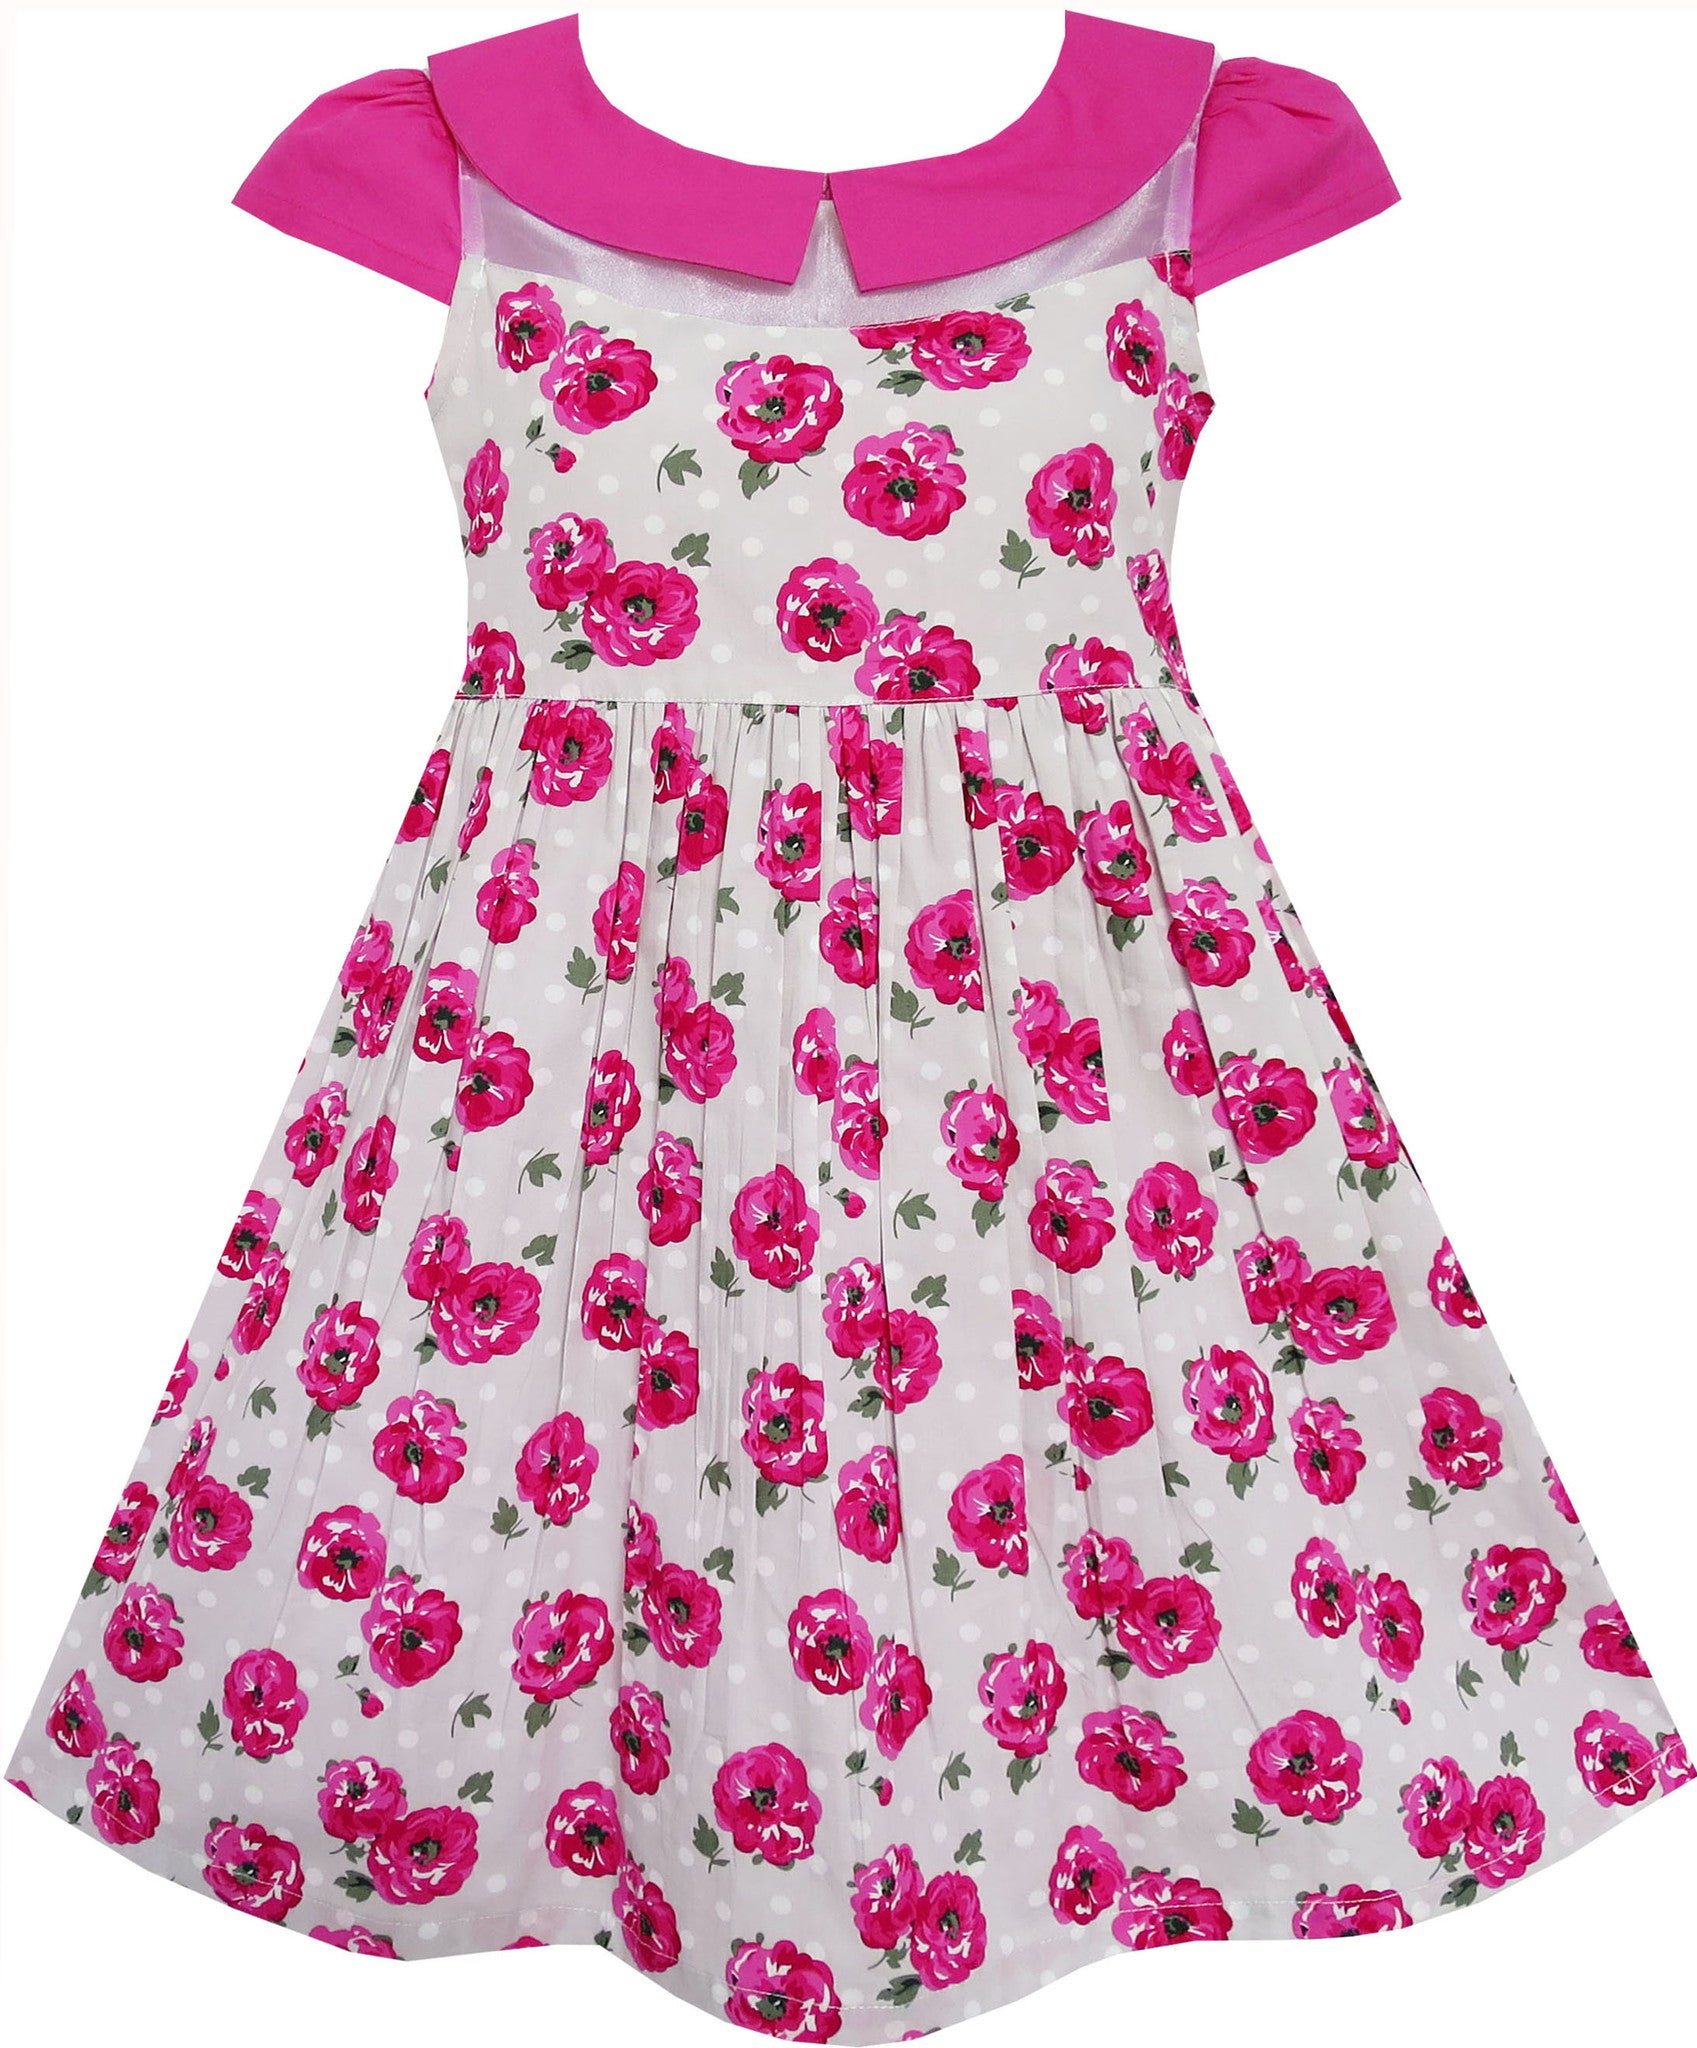 Girls Dress Bow Tie Pink Floral Turn-Down Collar And Trim – Sunny Fashion